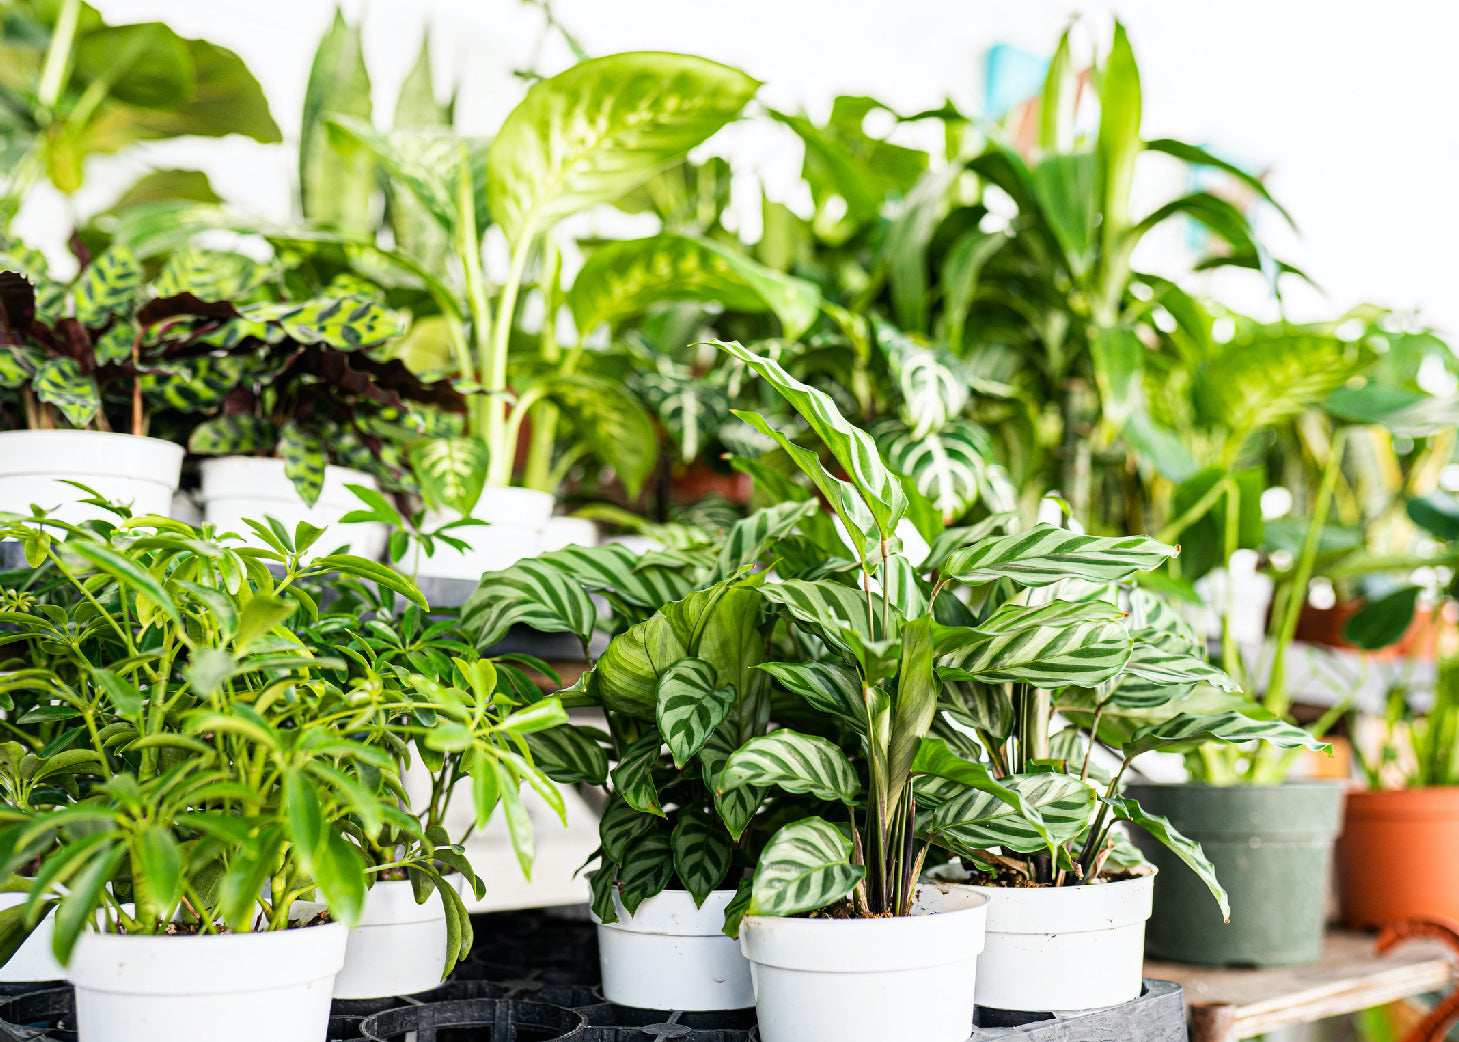 Go to the House Plants collection